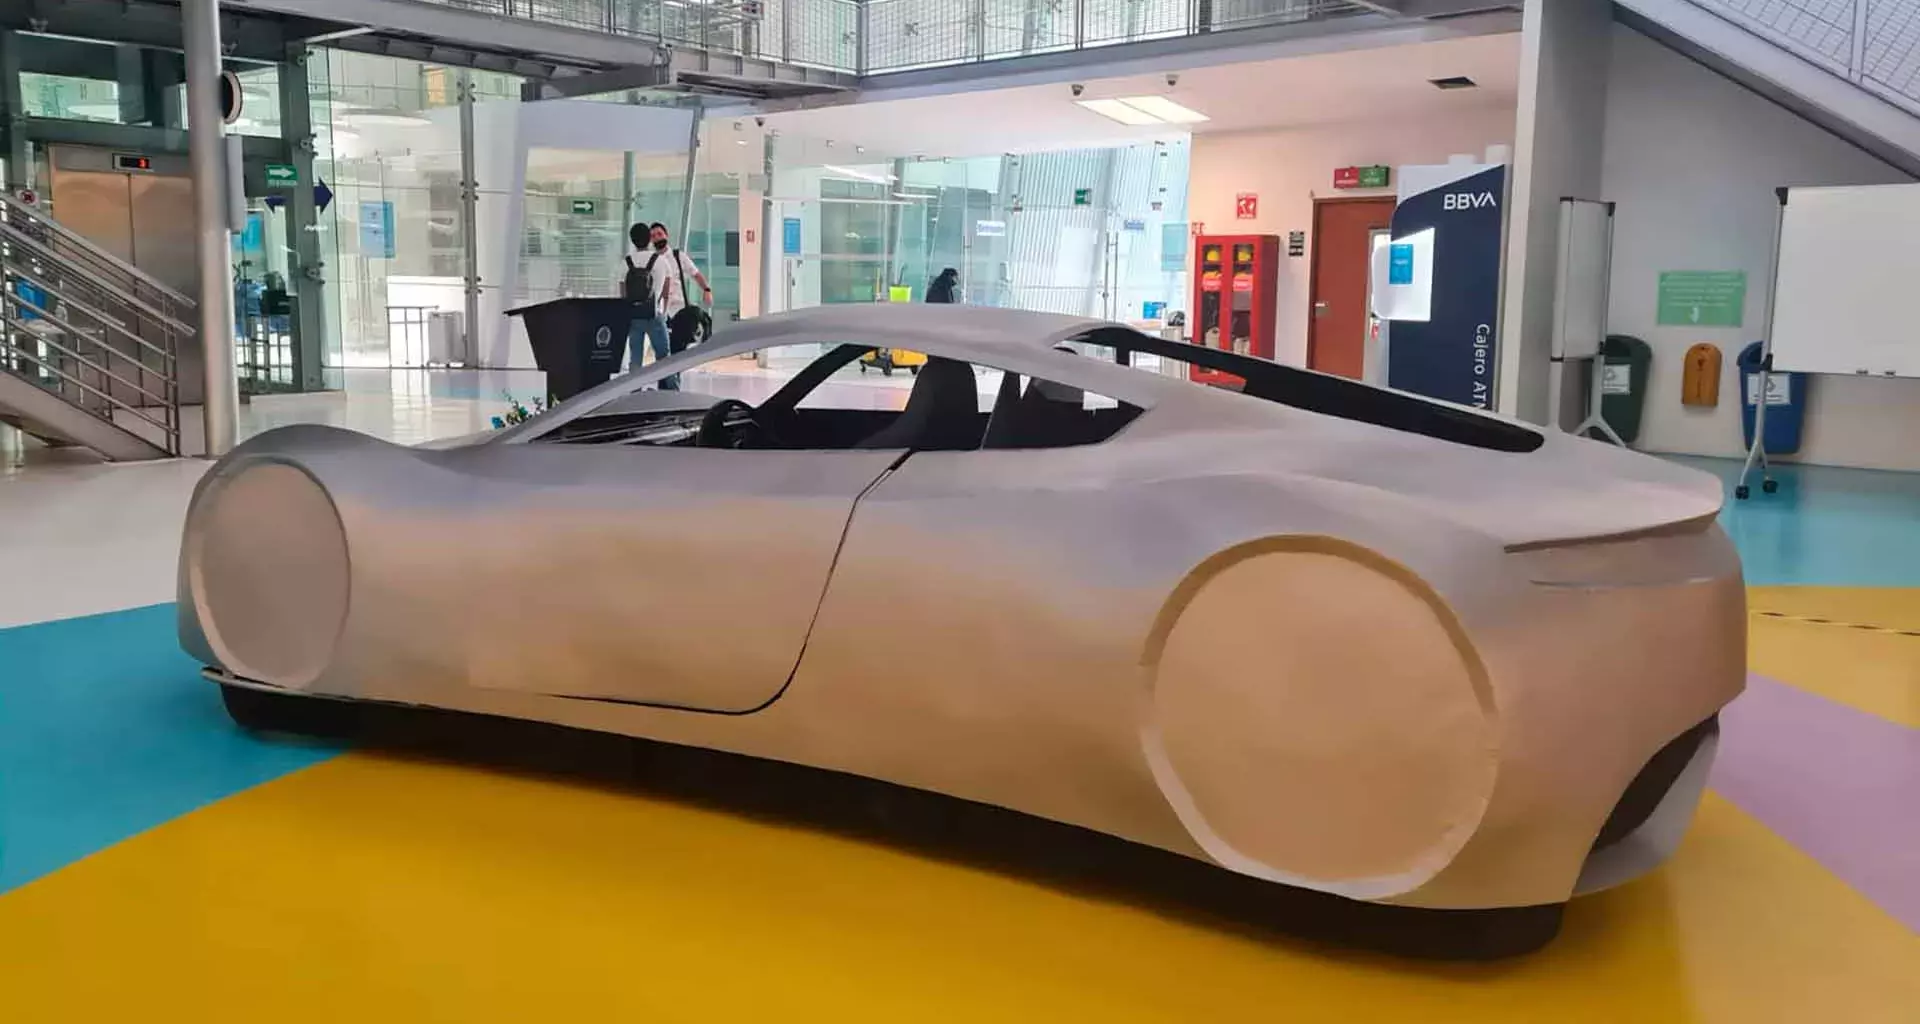 Mexicans create electric car with cutting-edge technology